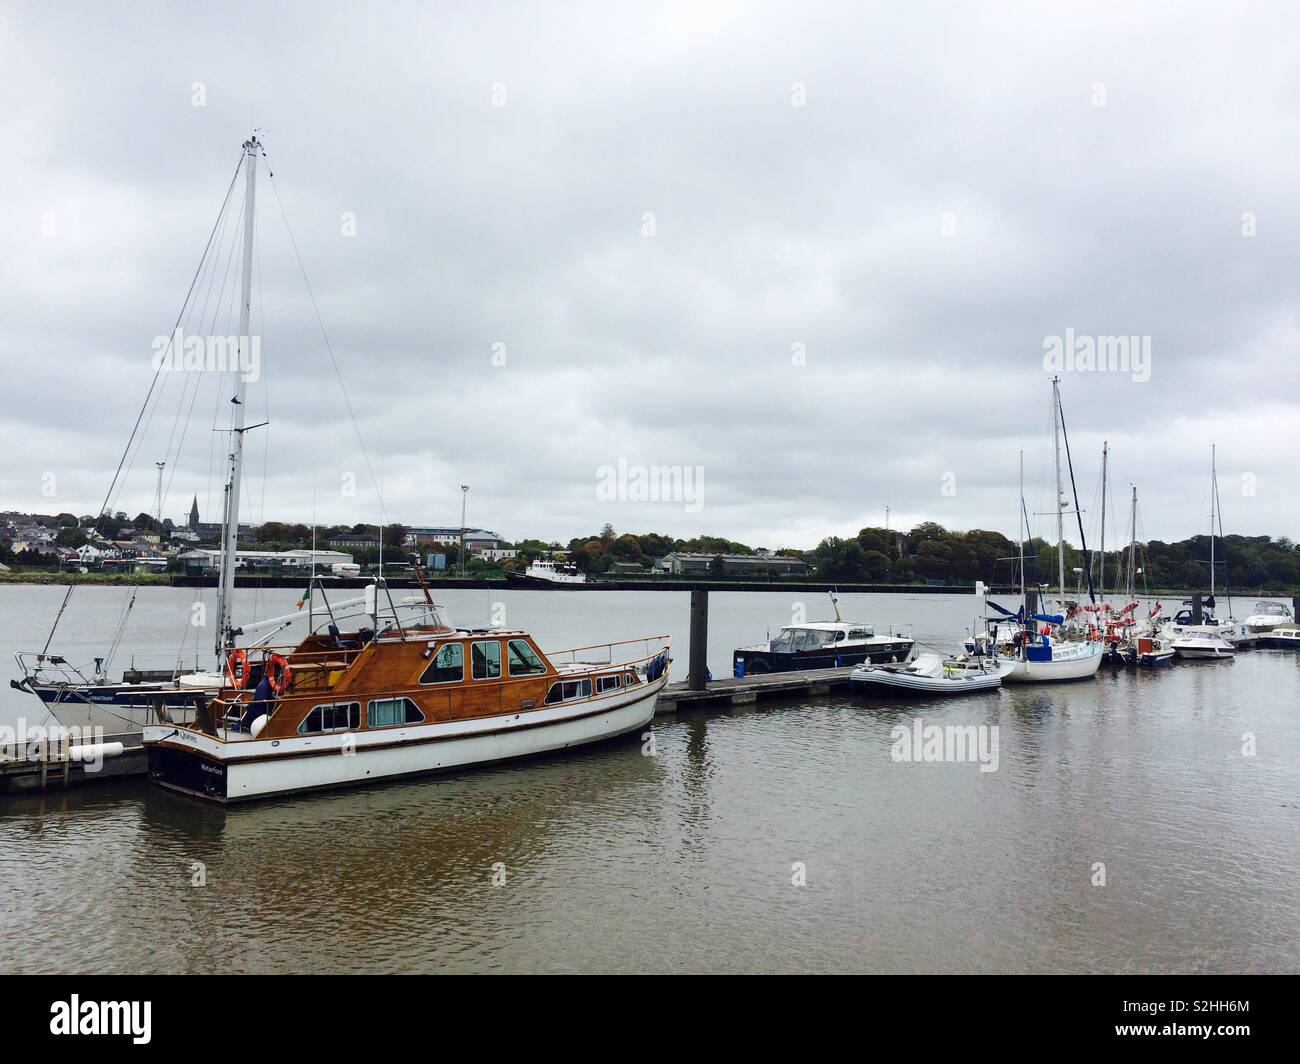 Yachts and boats moored at the jetty or walkway on a river in Waterford Ireland Stock Photo